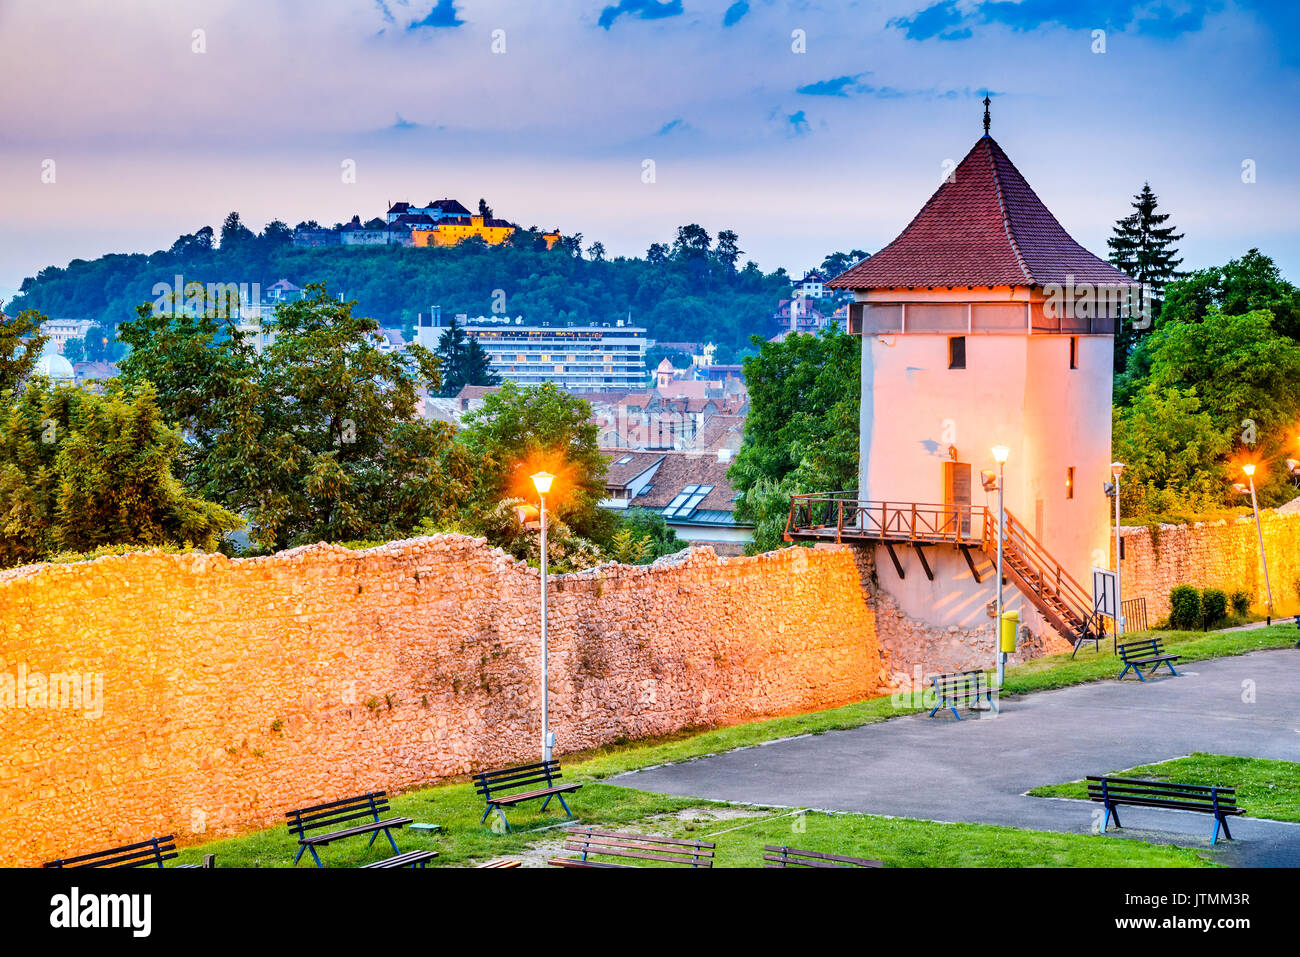 Brasov, Romania - Twilight image with medieval city walled fortifications, Black Church and the Citadel. Stock Photo